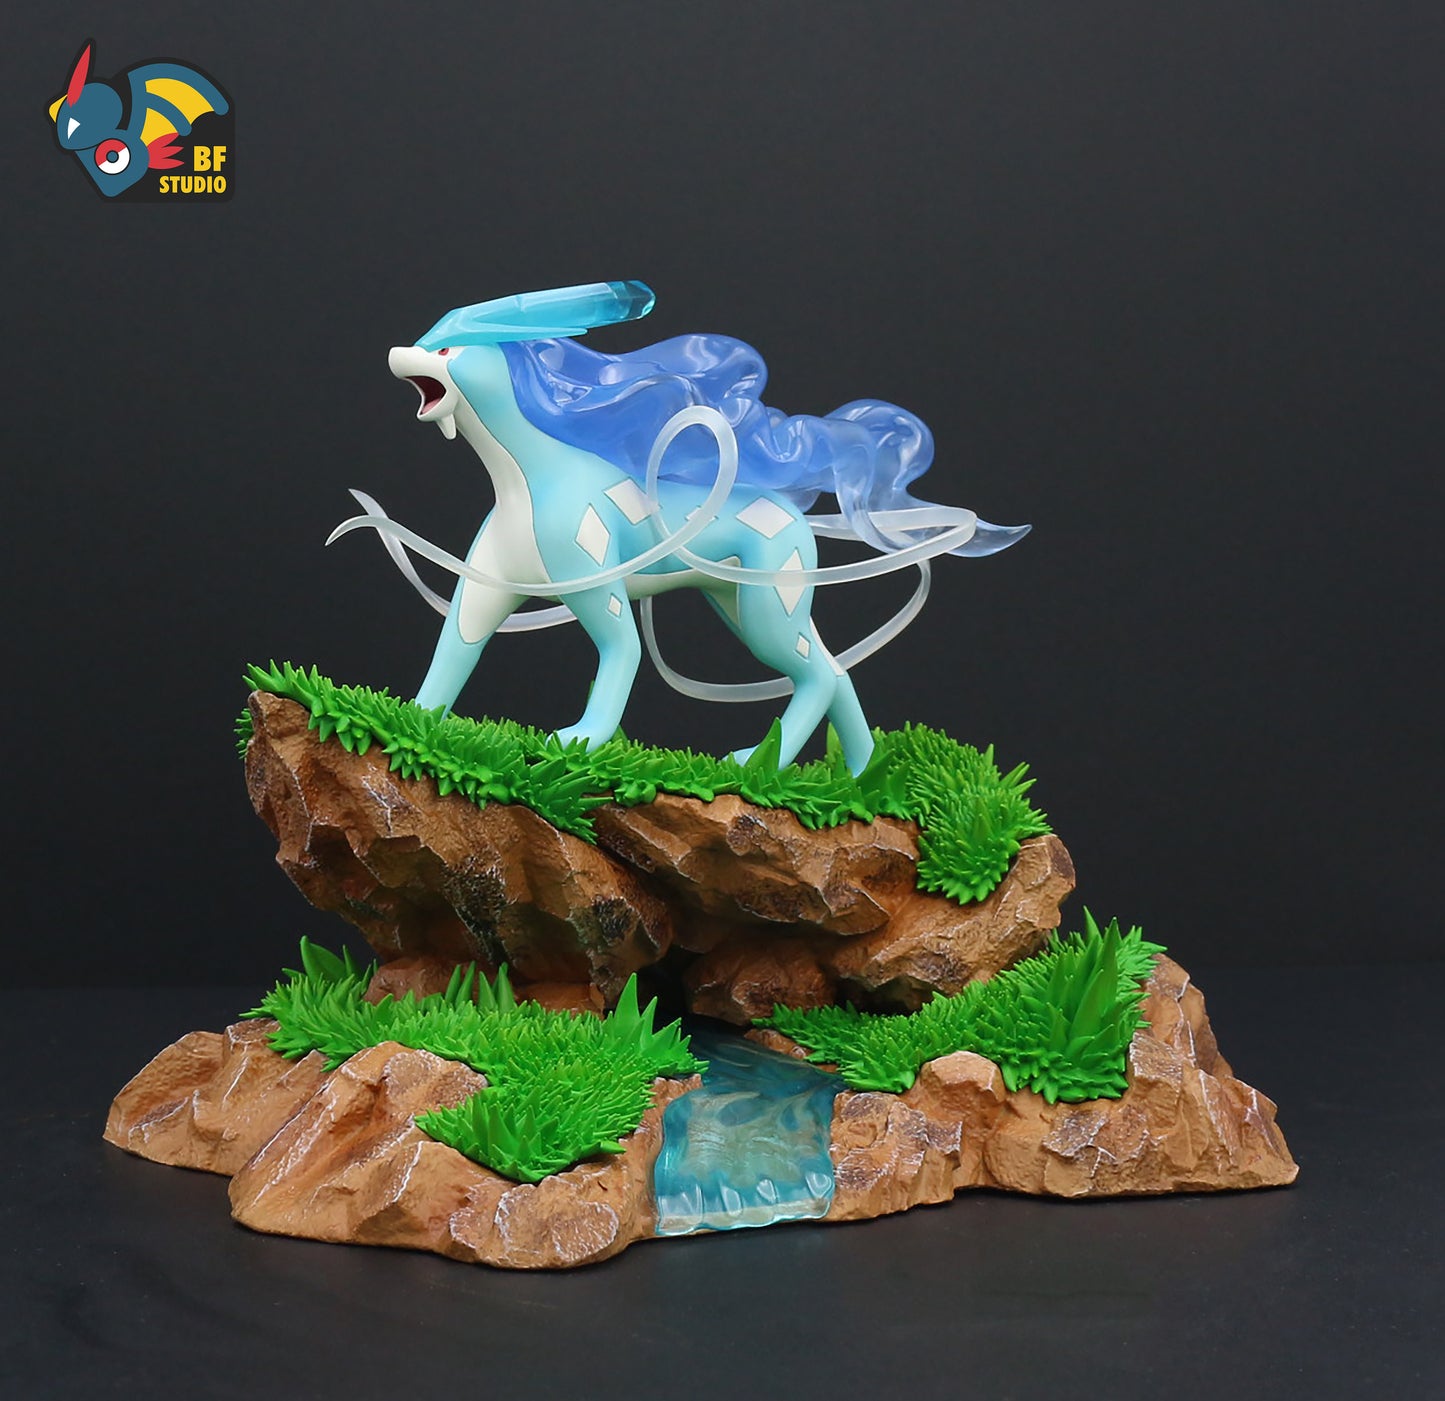 〖Sold Out〗Pokemon Scale World Suicune #245 1:20 - BF Studio